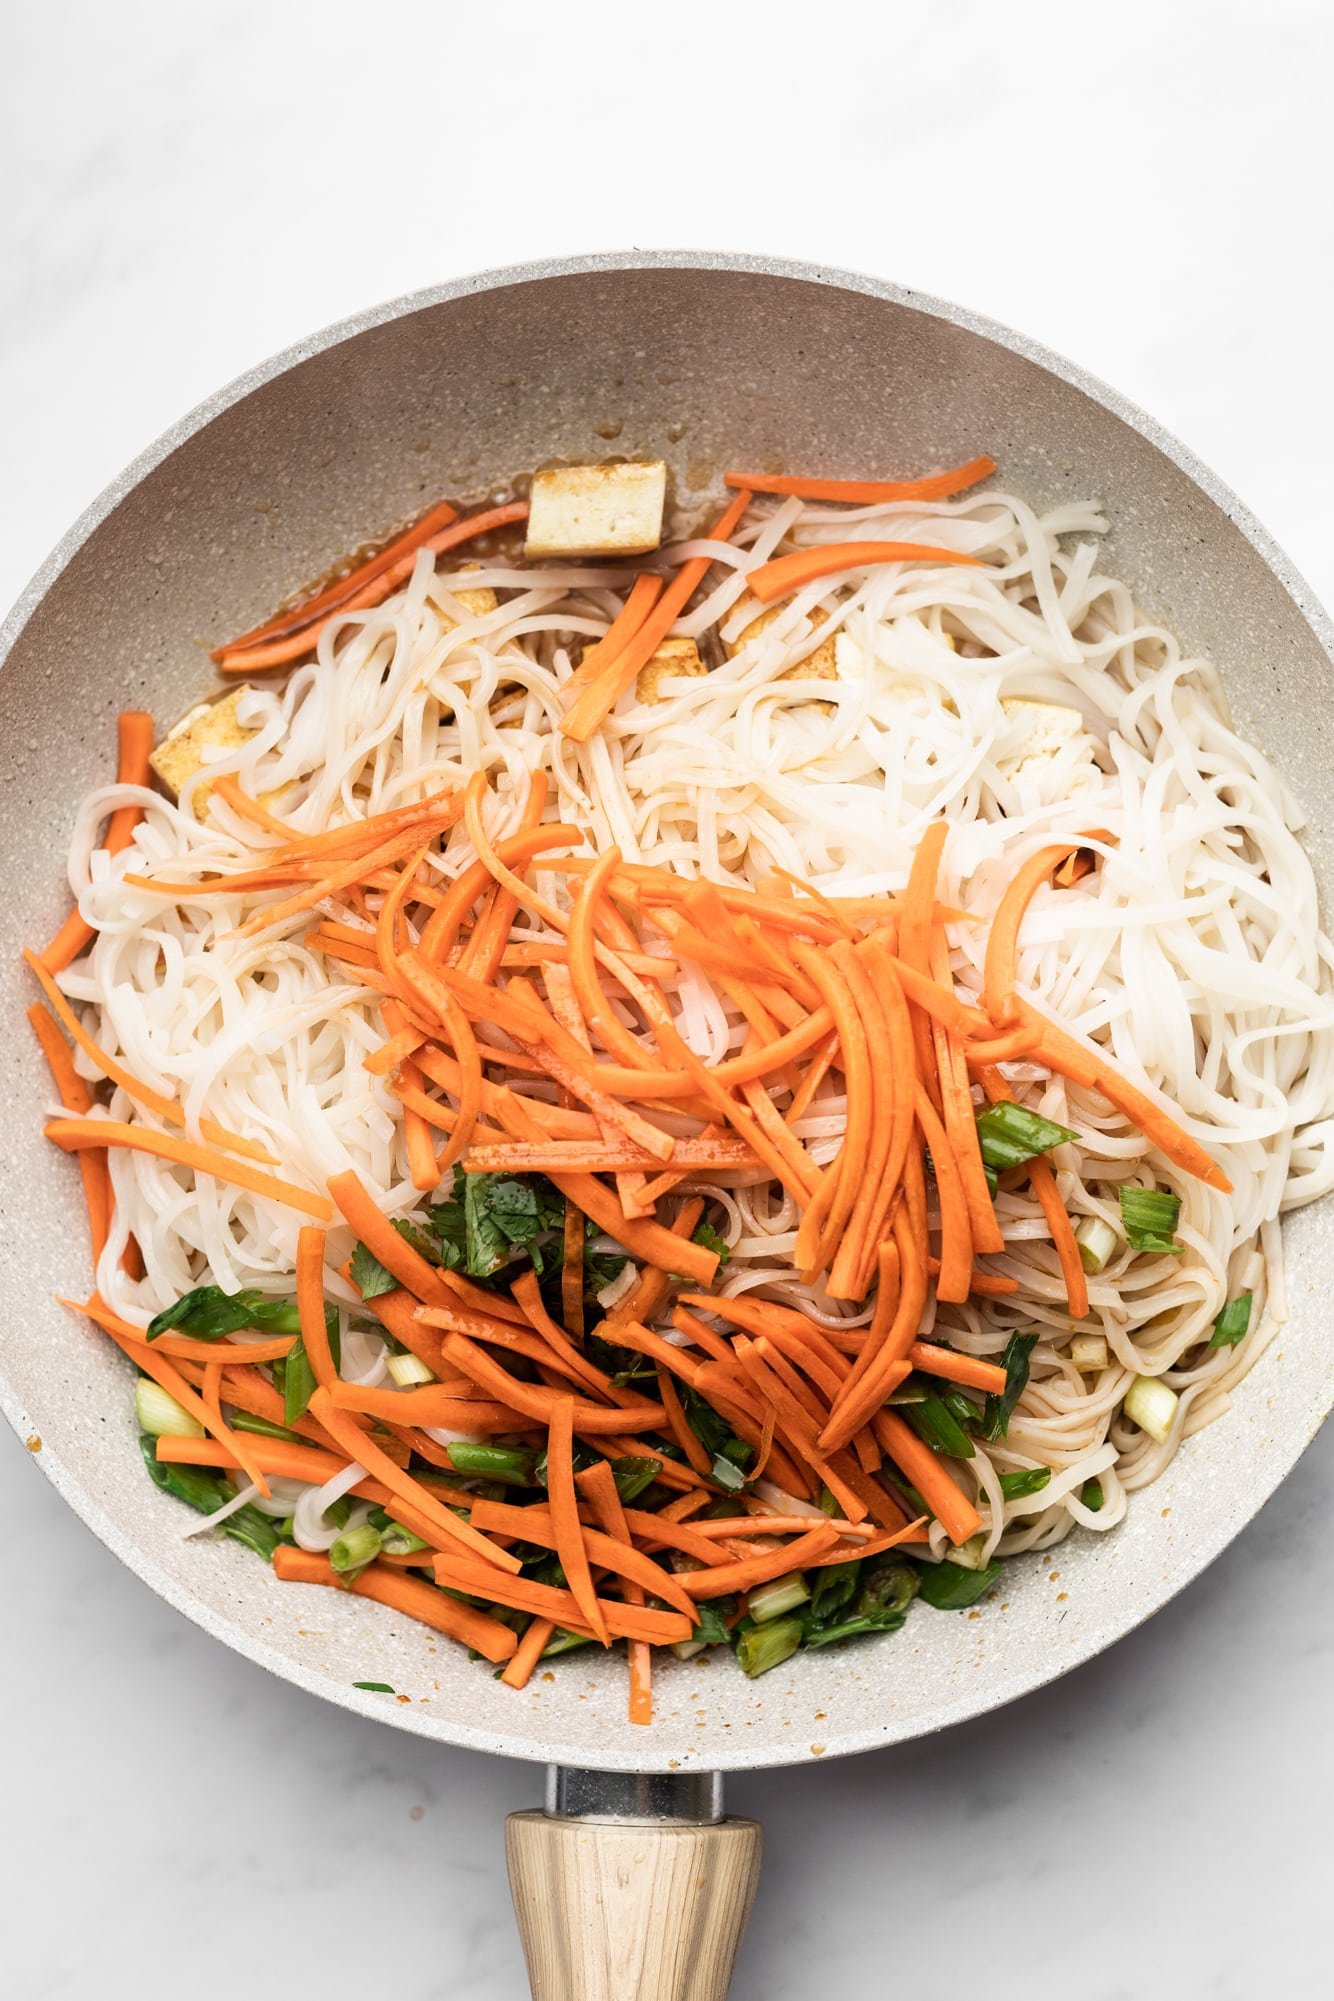 cooking rice noodles, carrots, and scallions together in a beige pan.